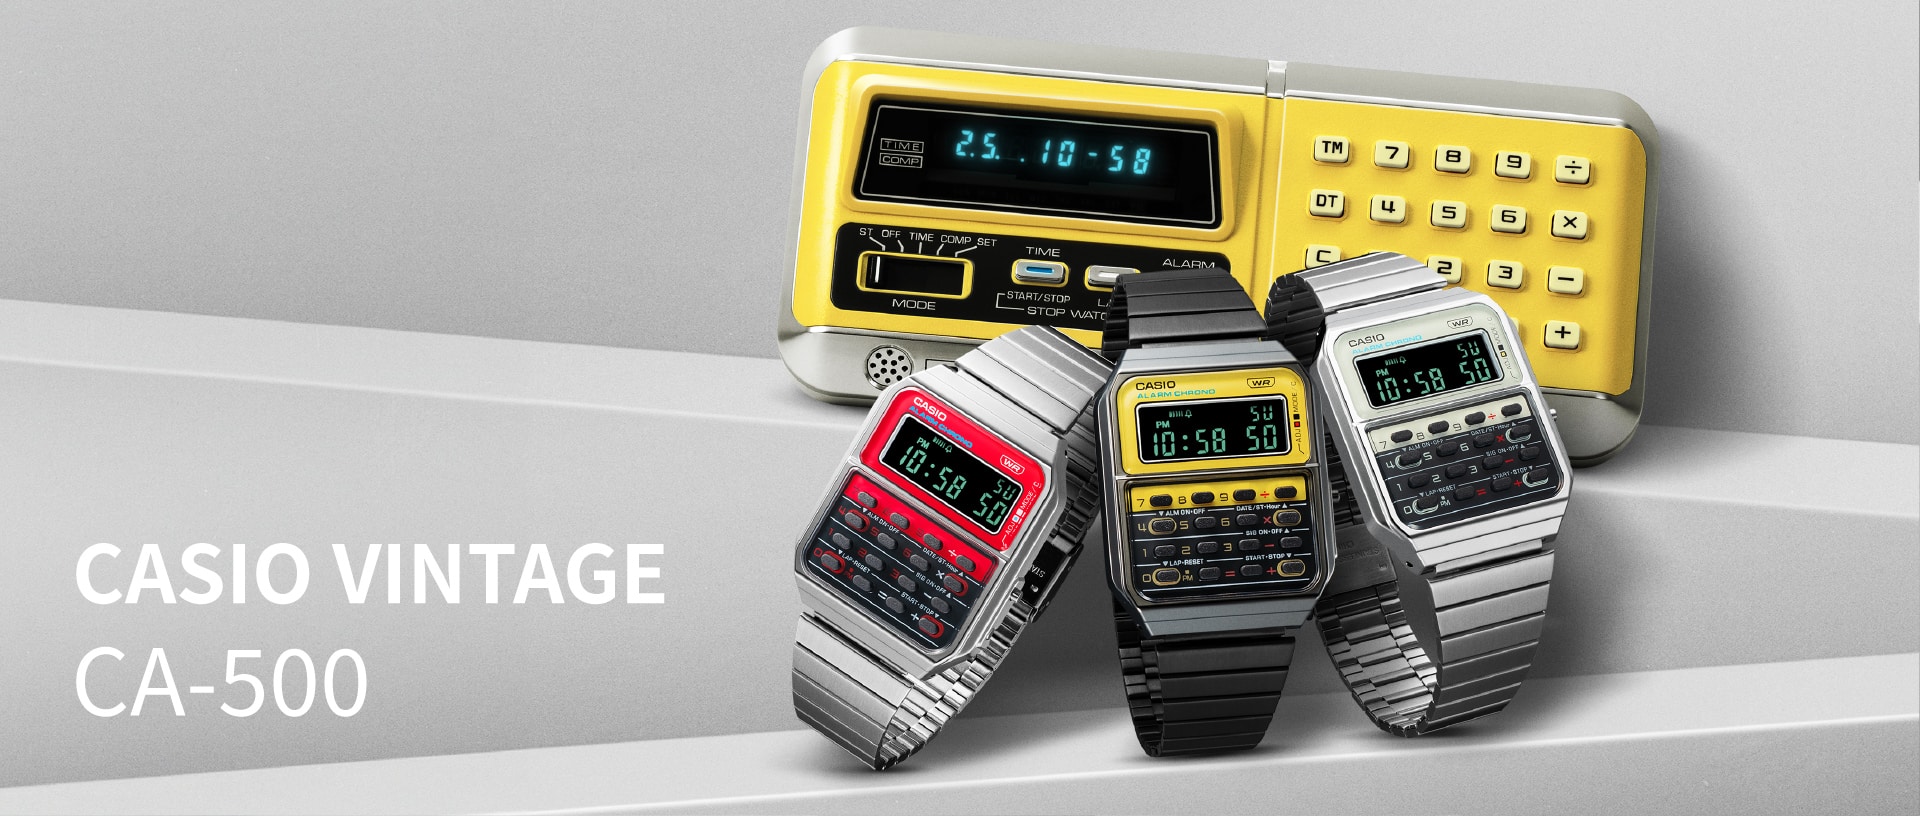 Time Traveling with Style: Rediscovering the CASIO Vintage Databank Calculator Watch in the Retro CA-500 Series